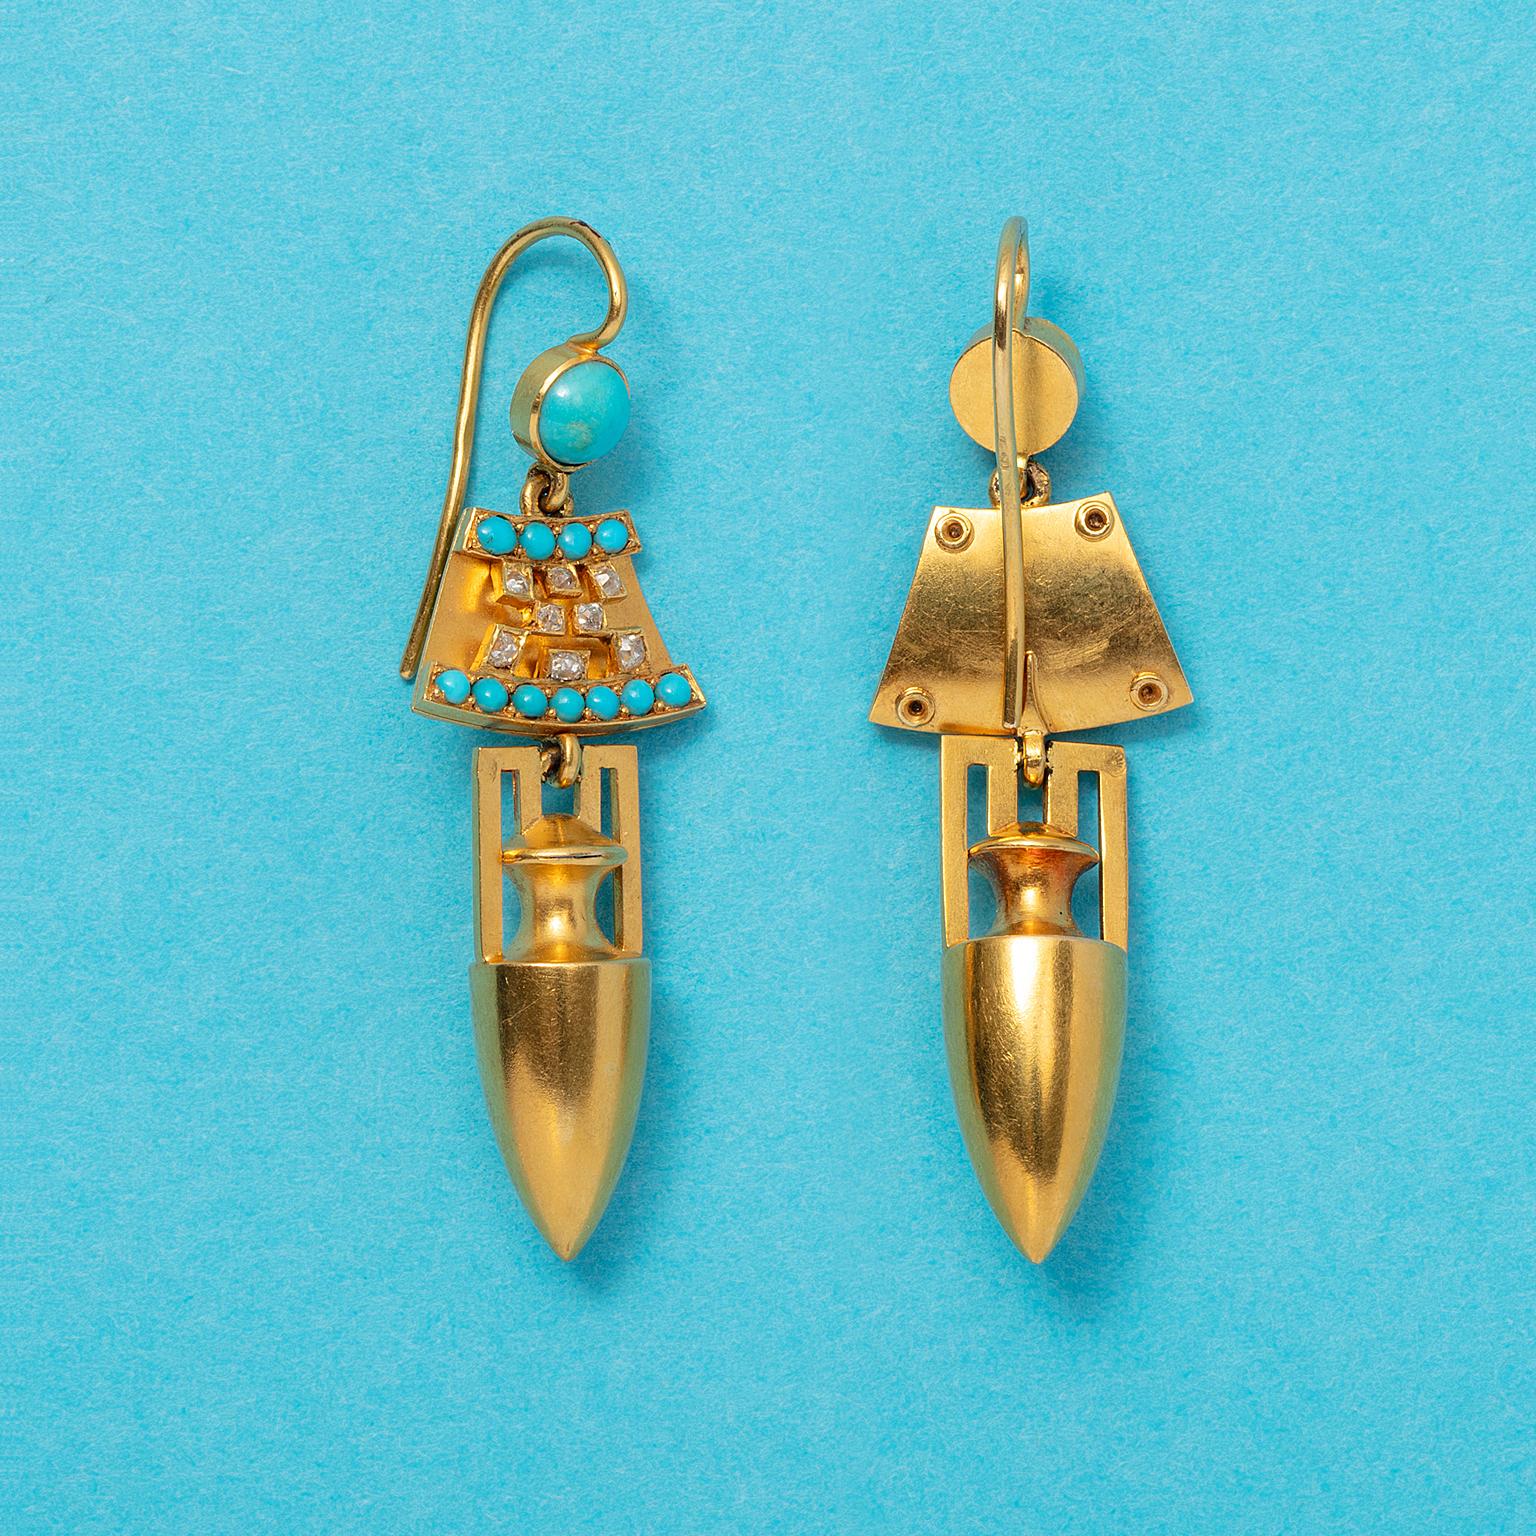 Etruscan Revival 15 Carat Gold Neo-Etruscan Earrings with Turquoise and Diamonds